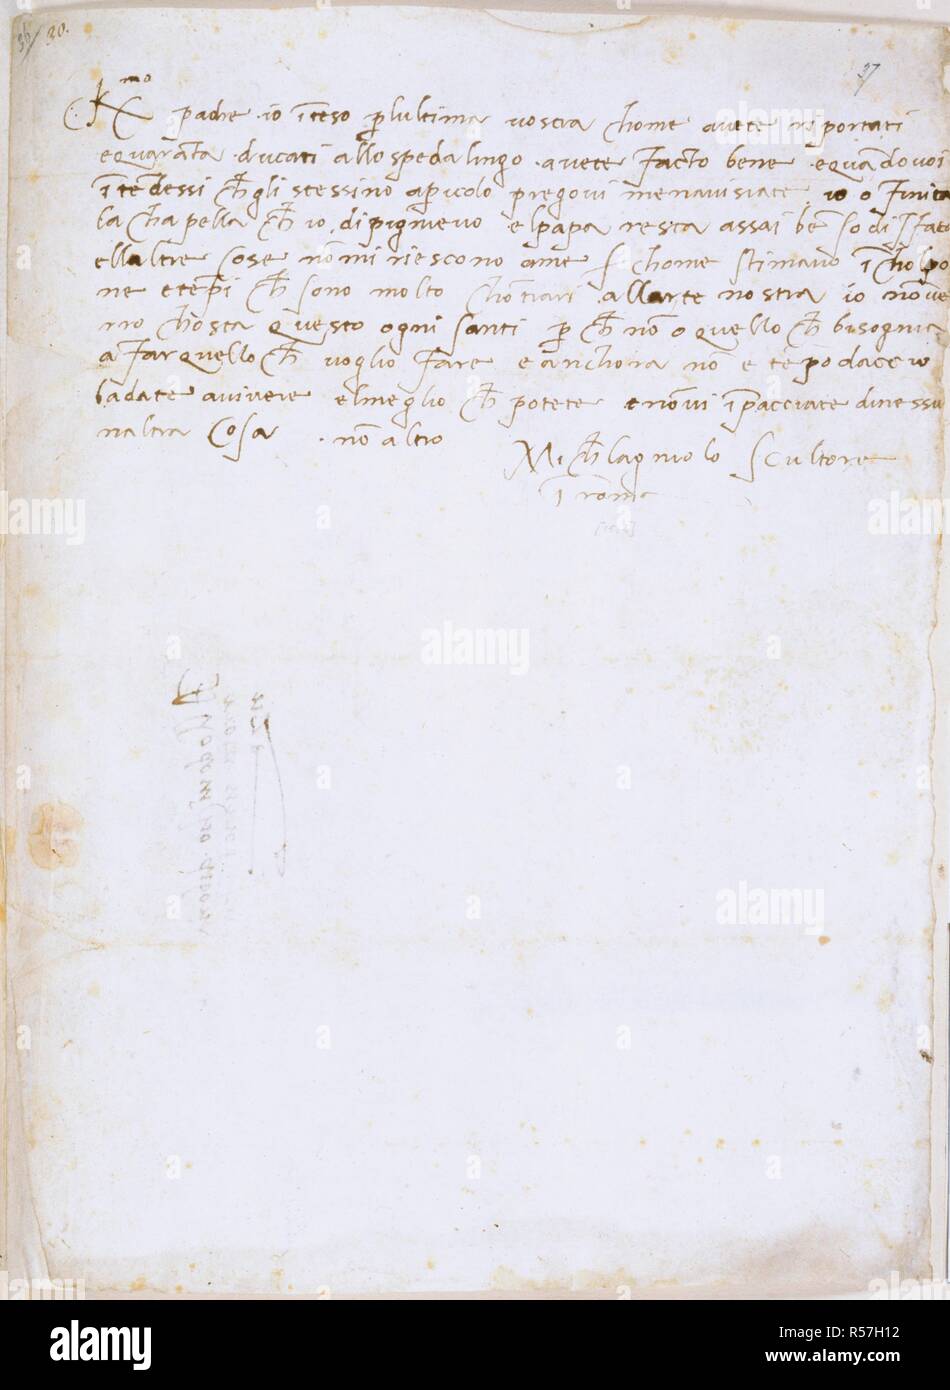 Letter Of Michelangelo Autograph Letters From Michelangelo Buonarroti To Italy Rome Circa 1512 Whole Folio Autograph Letter Of Michelangelo To His Father Ludovico Buonarroti Referring To The Completion Of Work On The